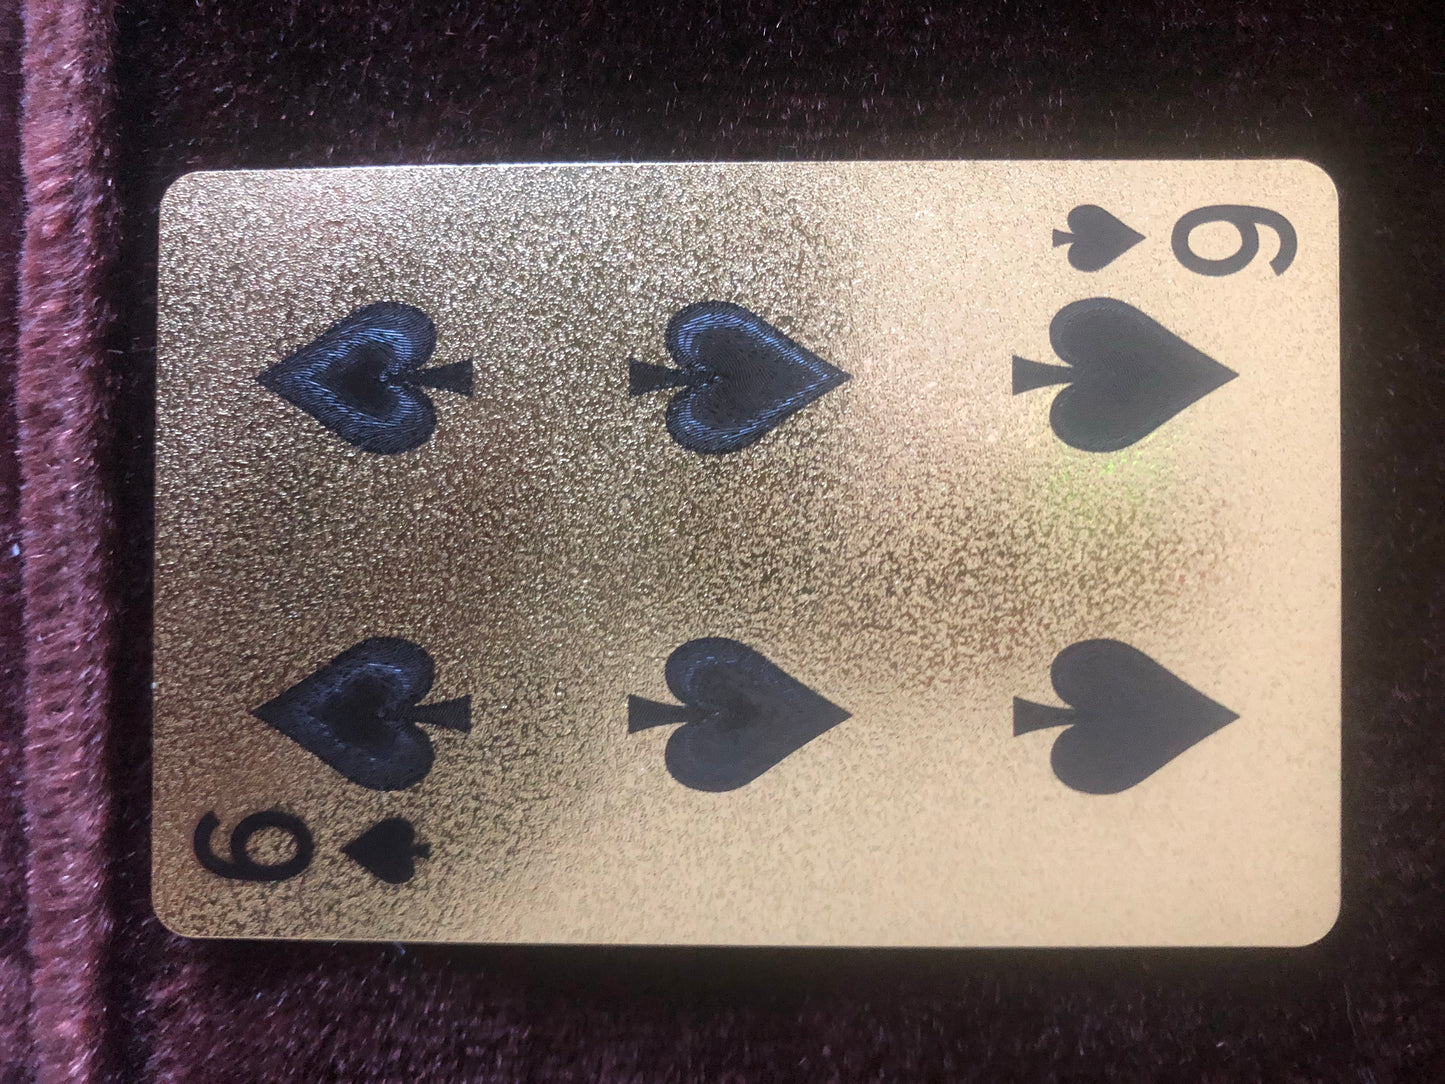 24K Gold Foil Blessed Playing Cards-Great for spell work, rituals and carried as a talisman.